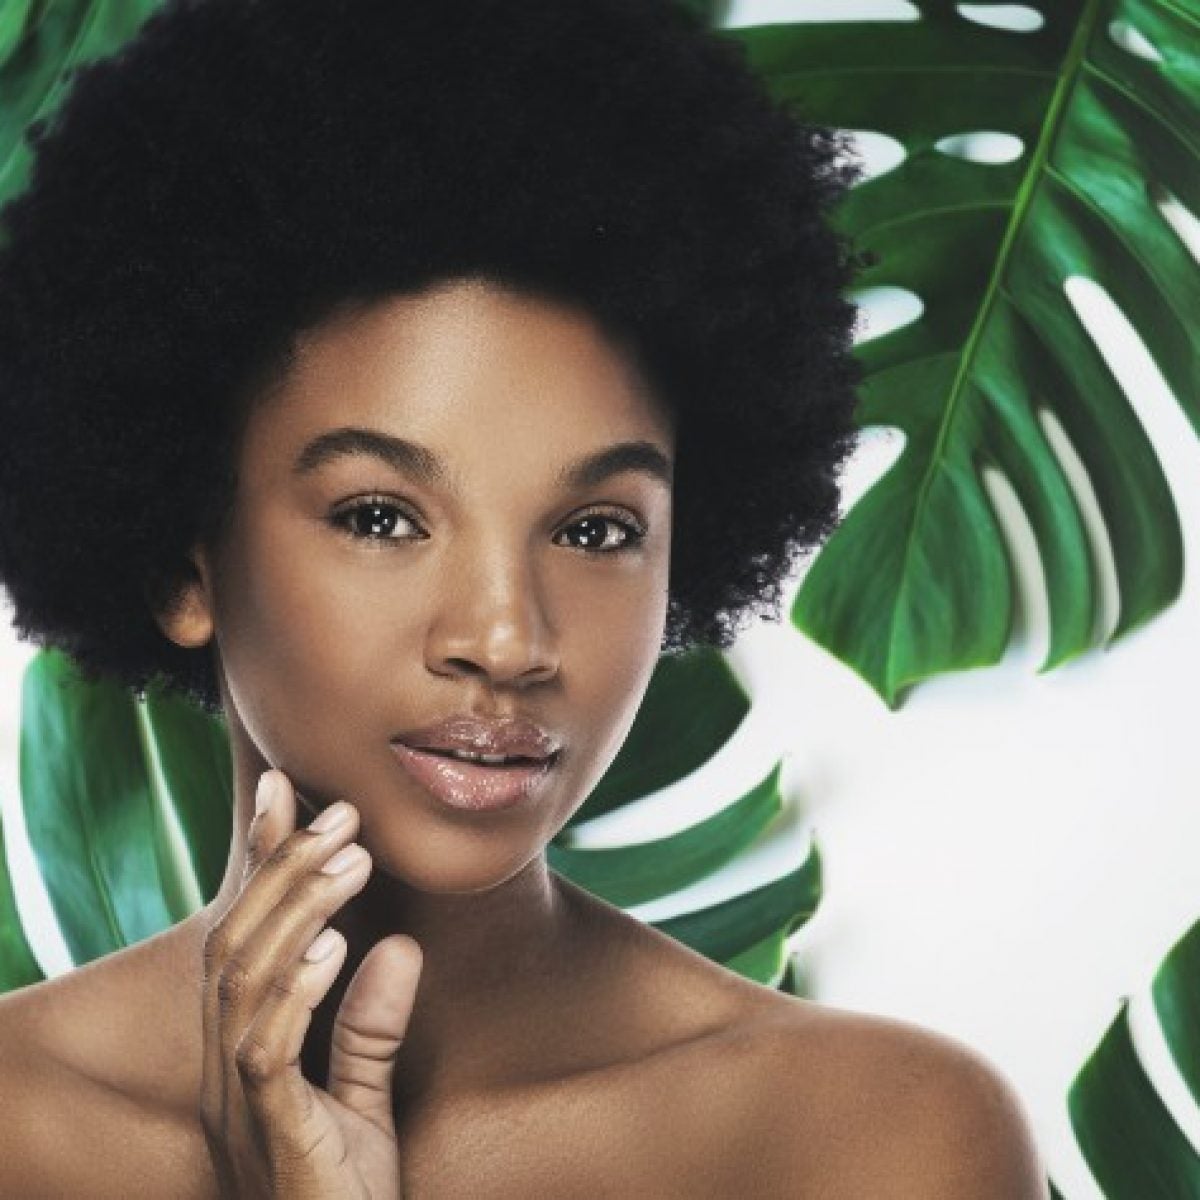 7 New Concealers That Will Replace Your Foundation This Summer